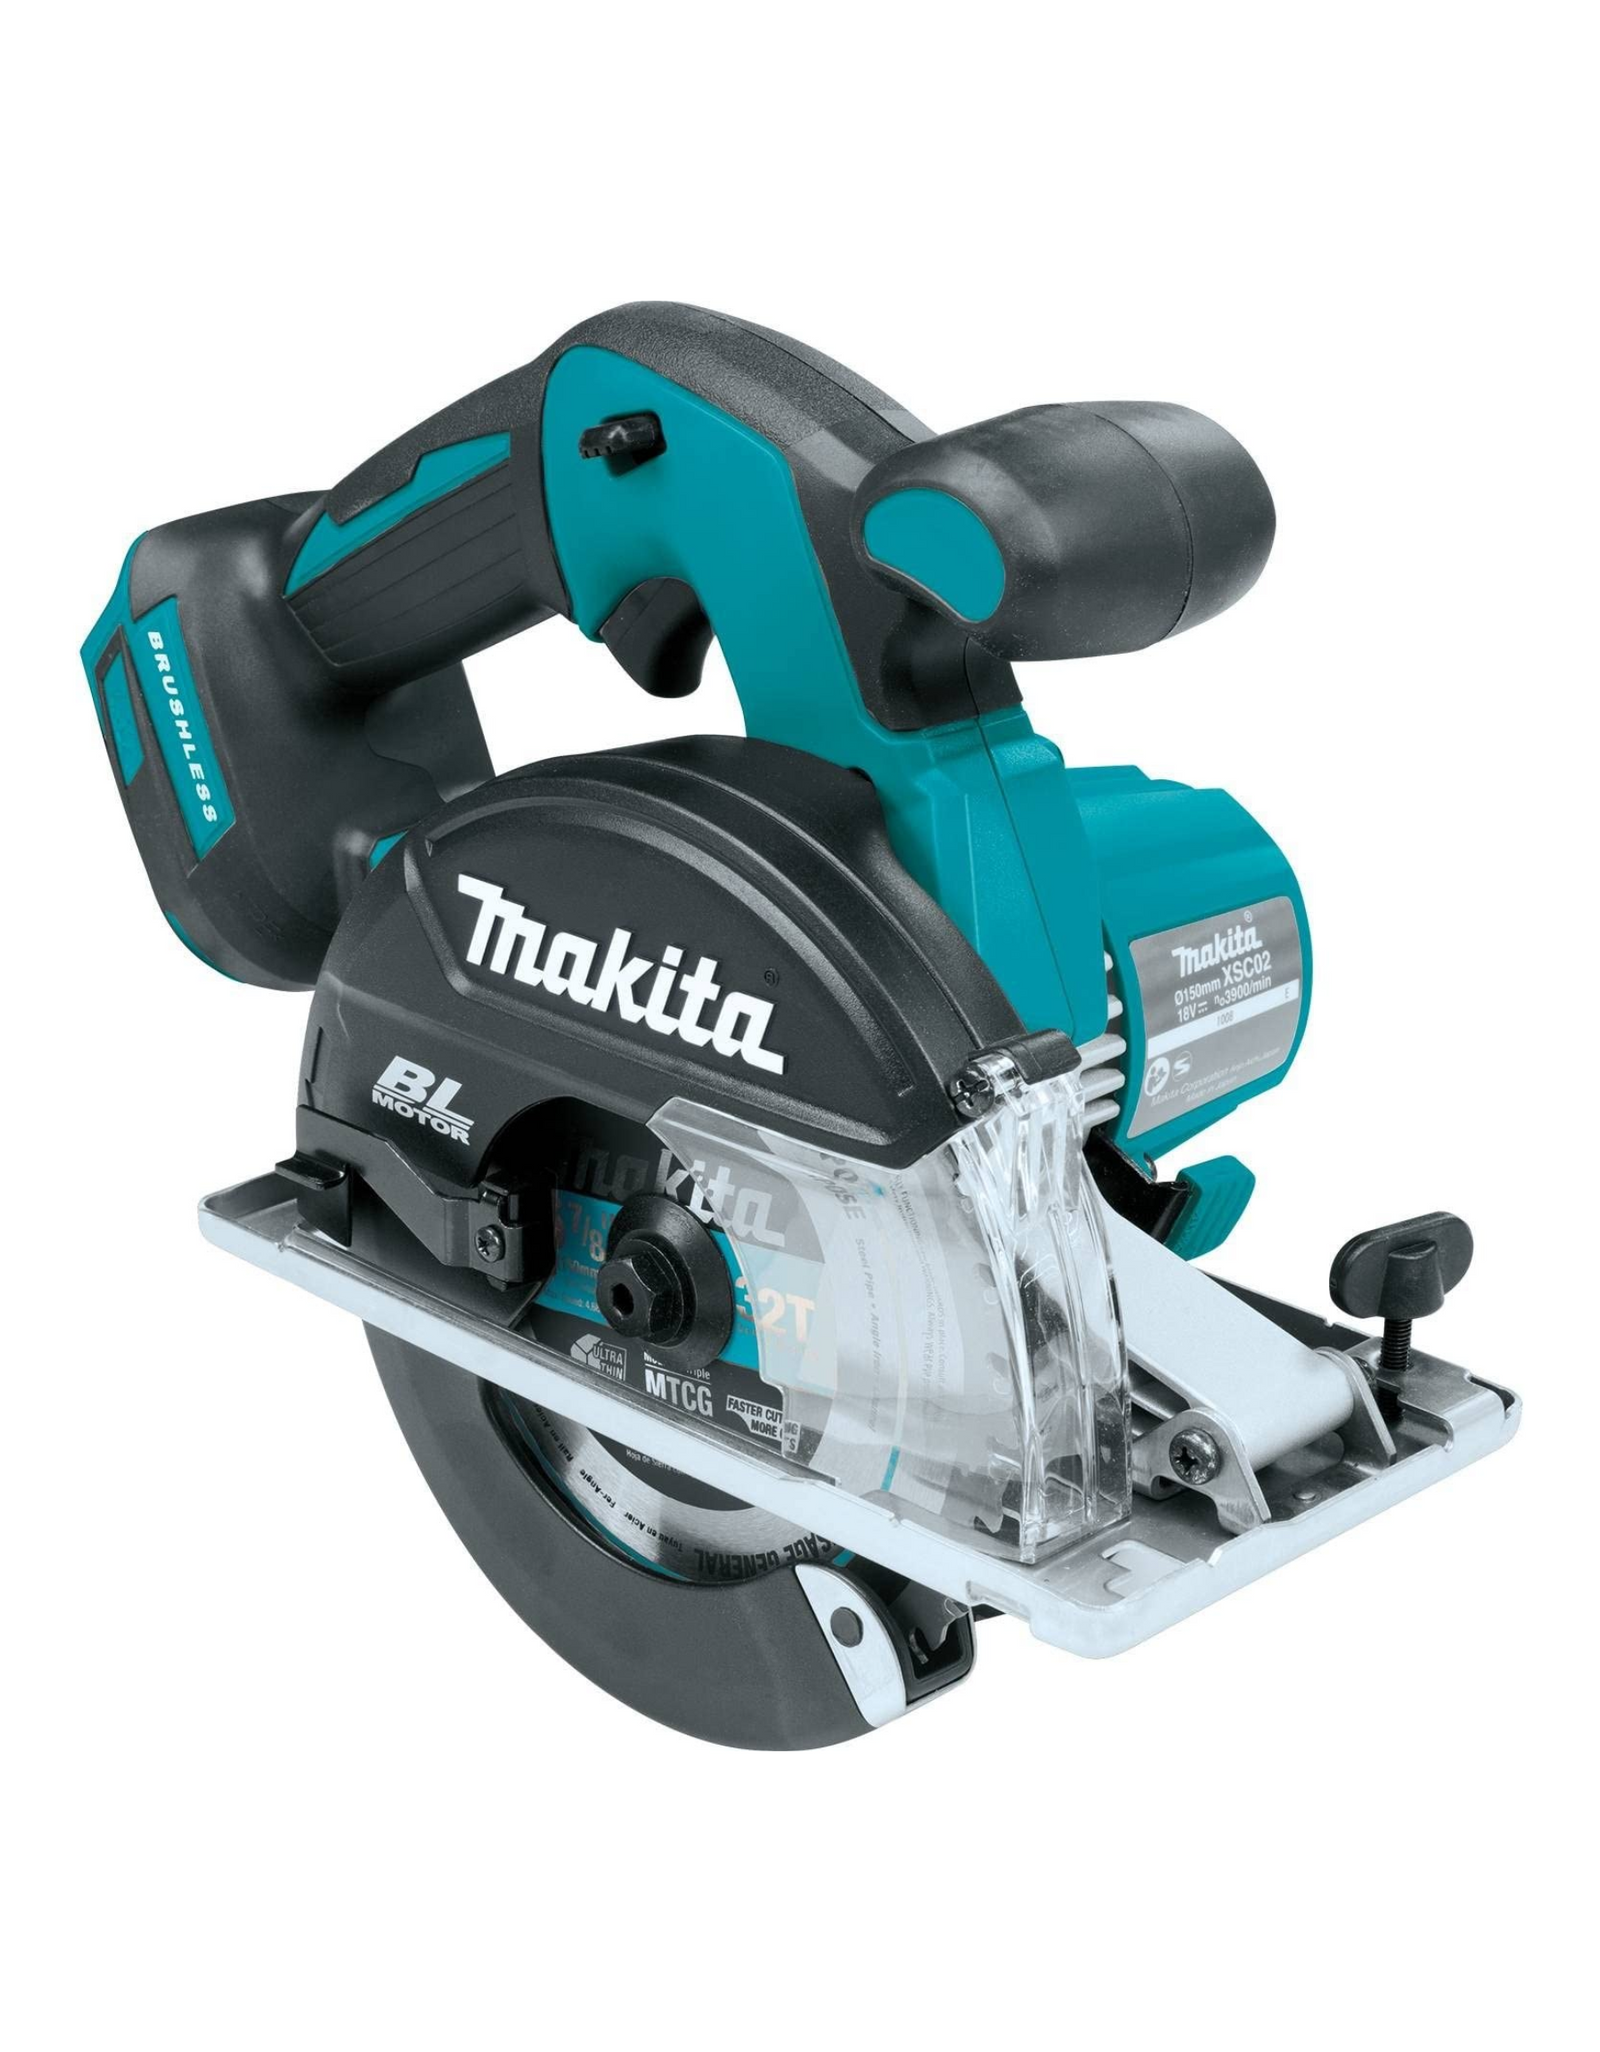 Makita XSC02Z 18V LXT Lithium-Ion Brushless Cordless 5-7/8 Inch Metal Cutting Saw (Tool Only)